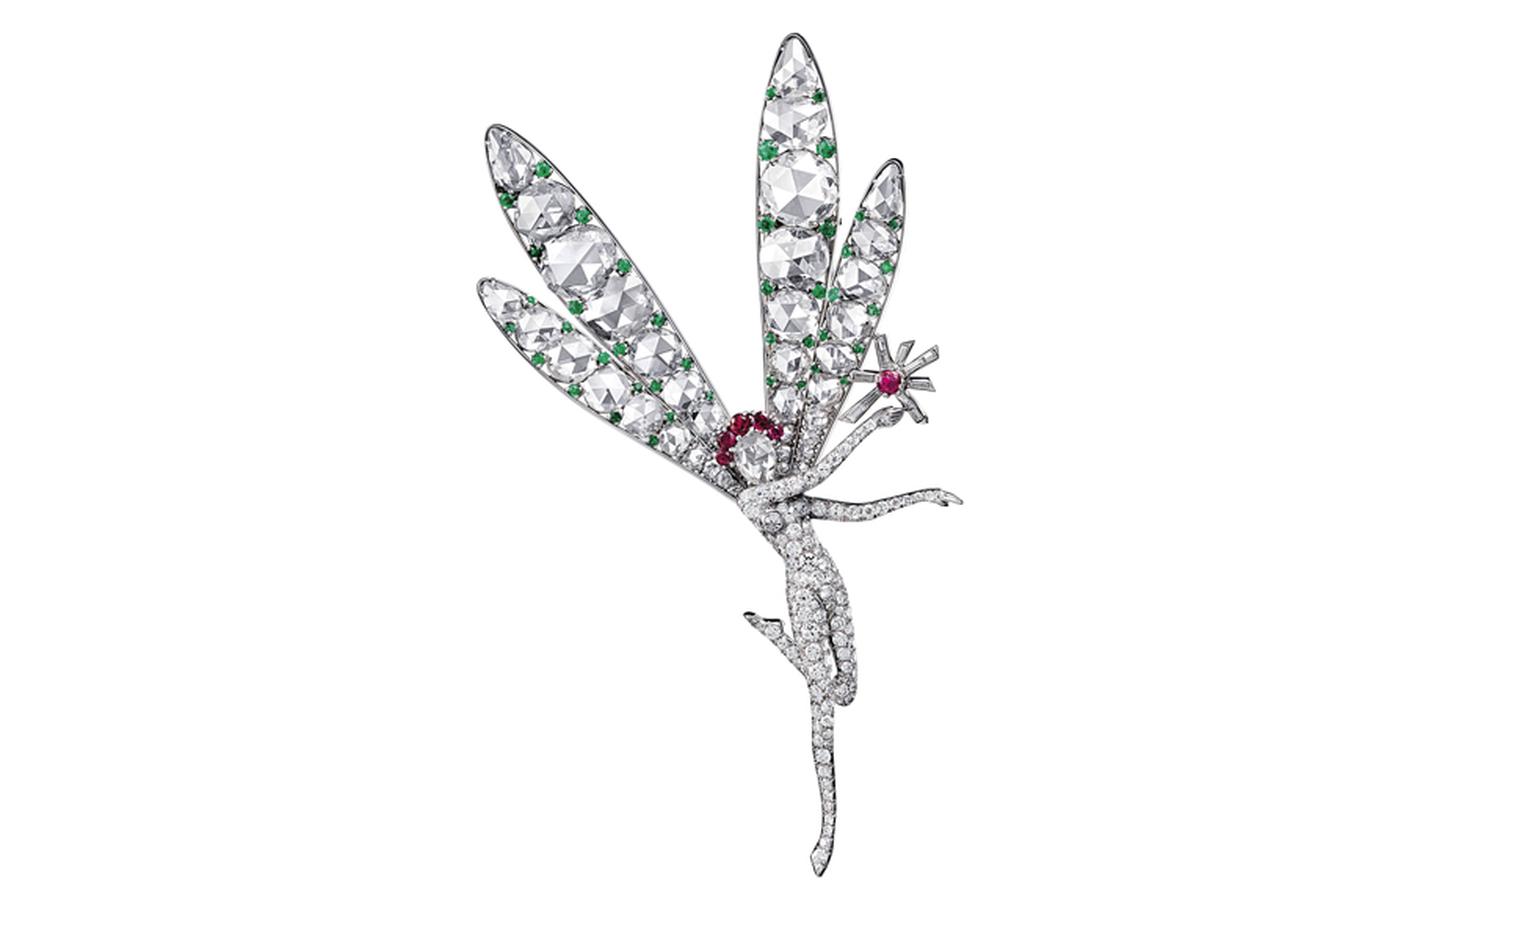 Van Cleef & Arpels The Spirit of Beauty fairy clip was bought by Barbara Hutton at Van Cleef & Arpels’ Beverley Hills boutique in the 1940s. Platinum, rubies, emeralds & diamonds, 1944.